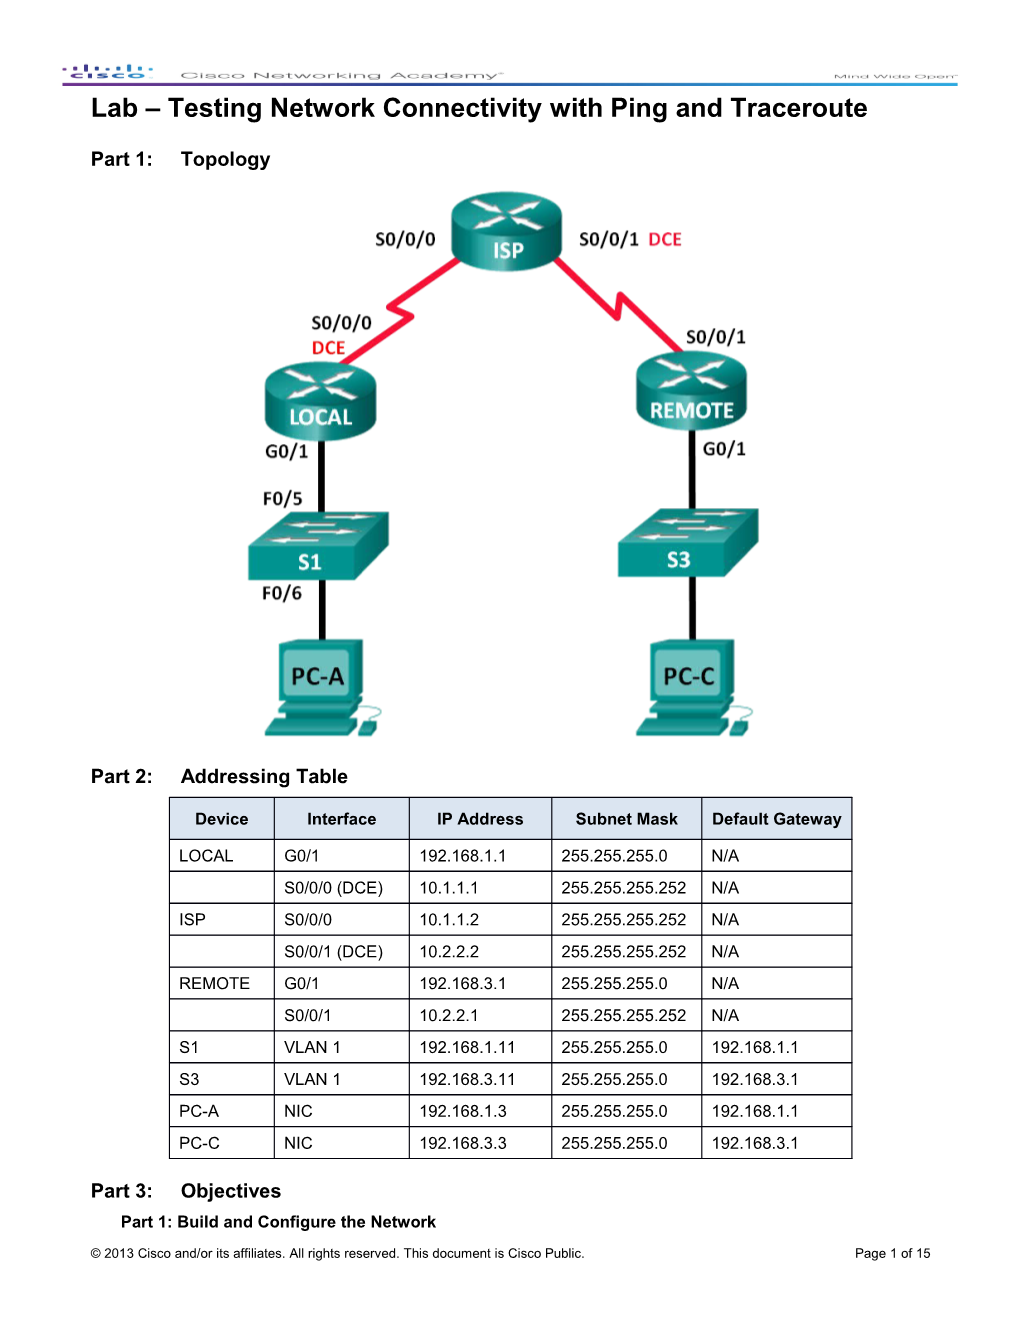 Lab Testing Network Connectivity with Ping and Traceroute